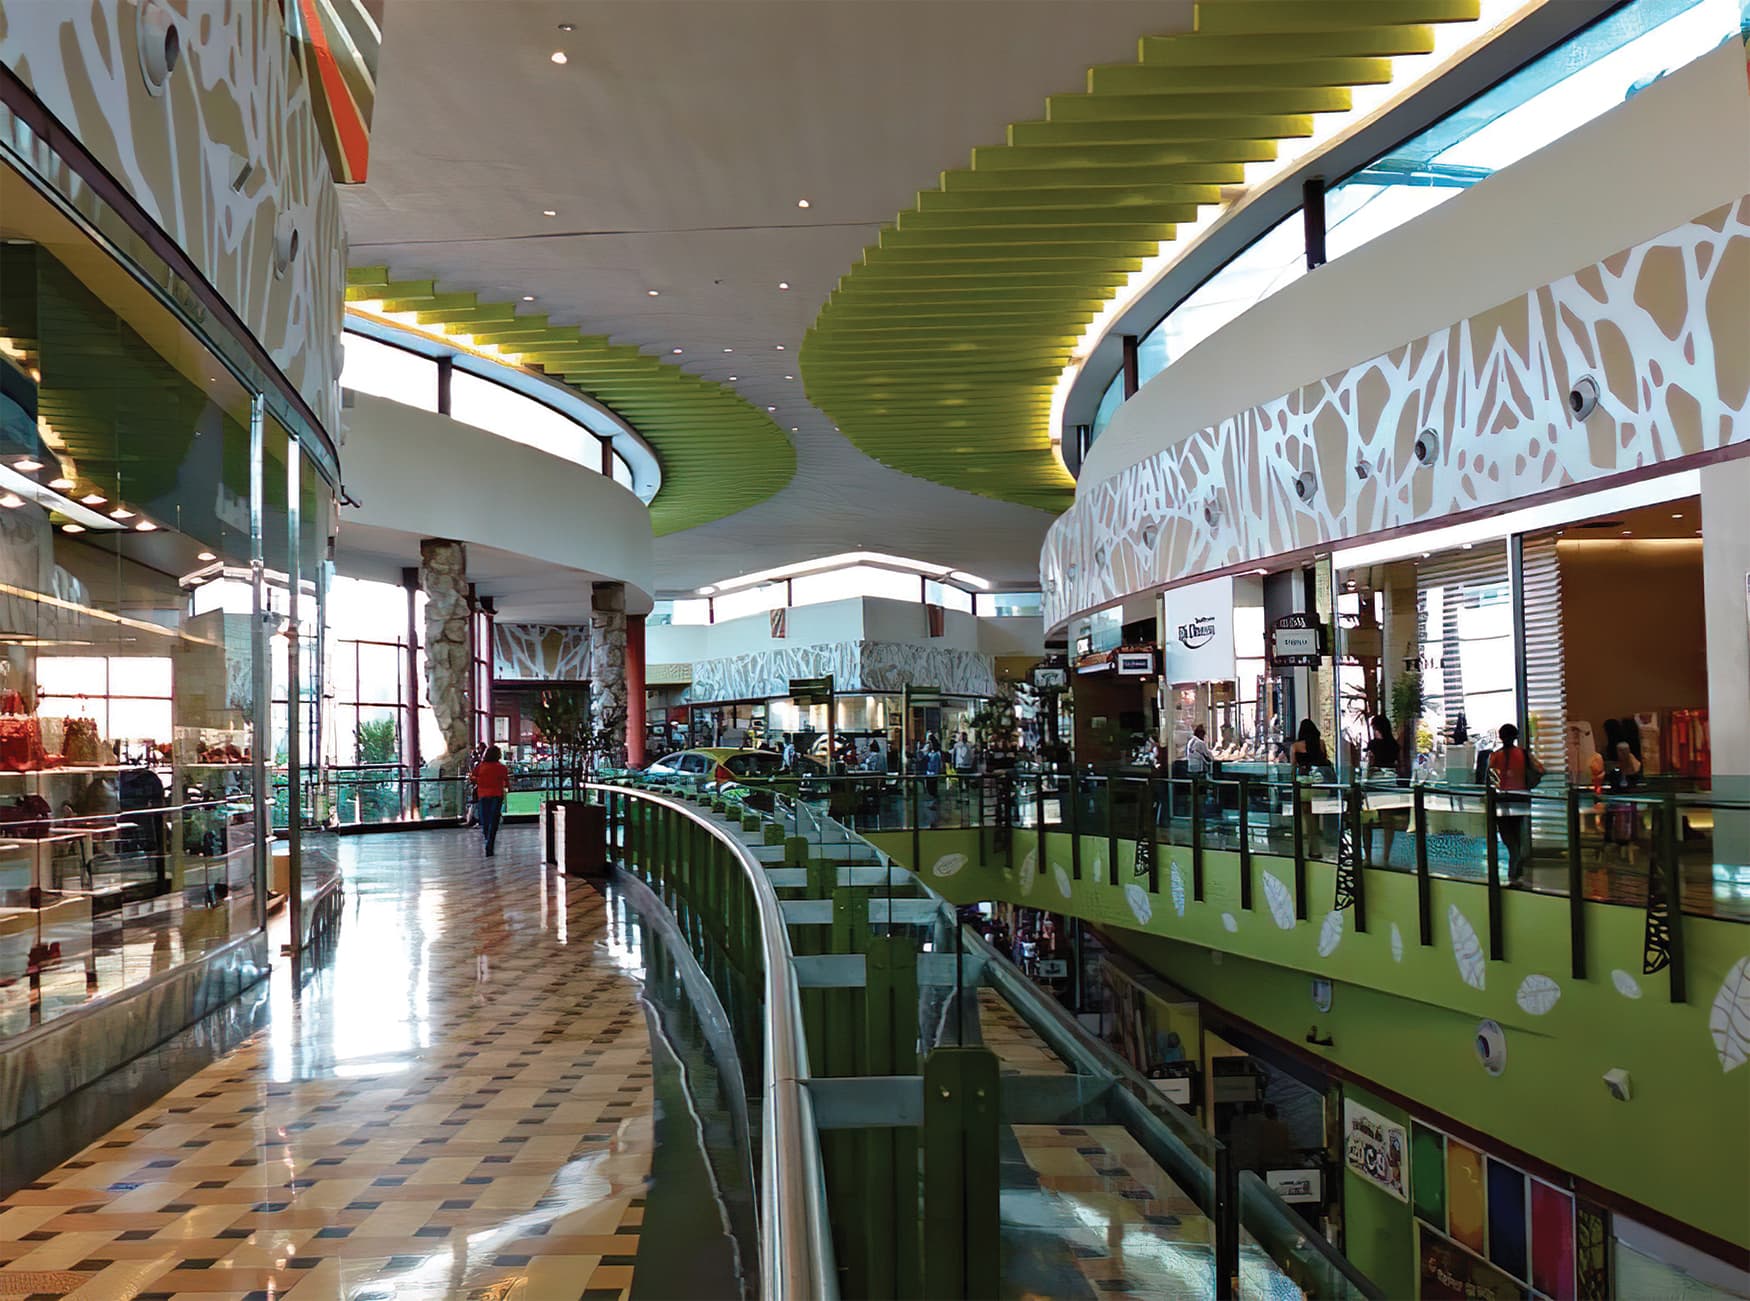 Manauara Shopping, a retail destination project located in Brazil. Food Hall Design.